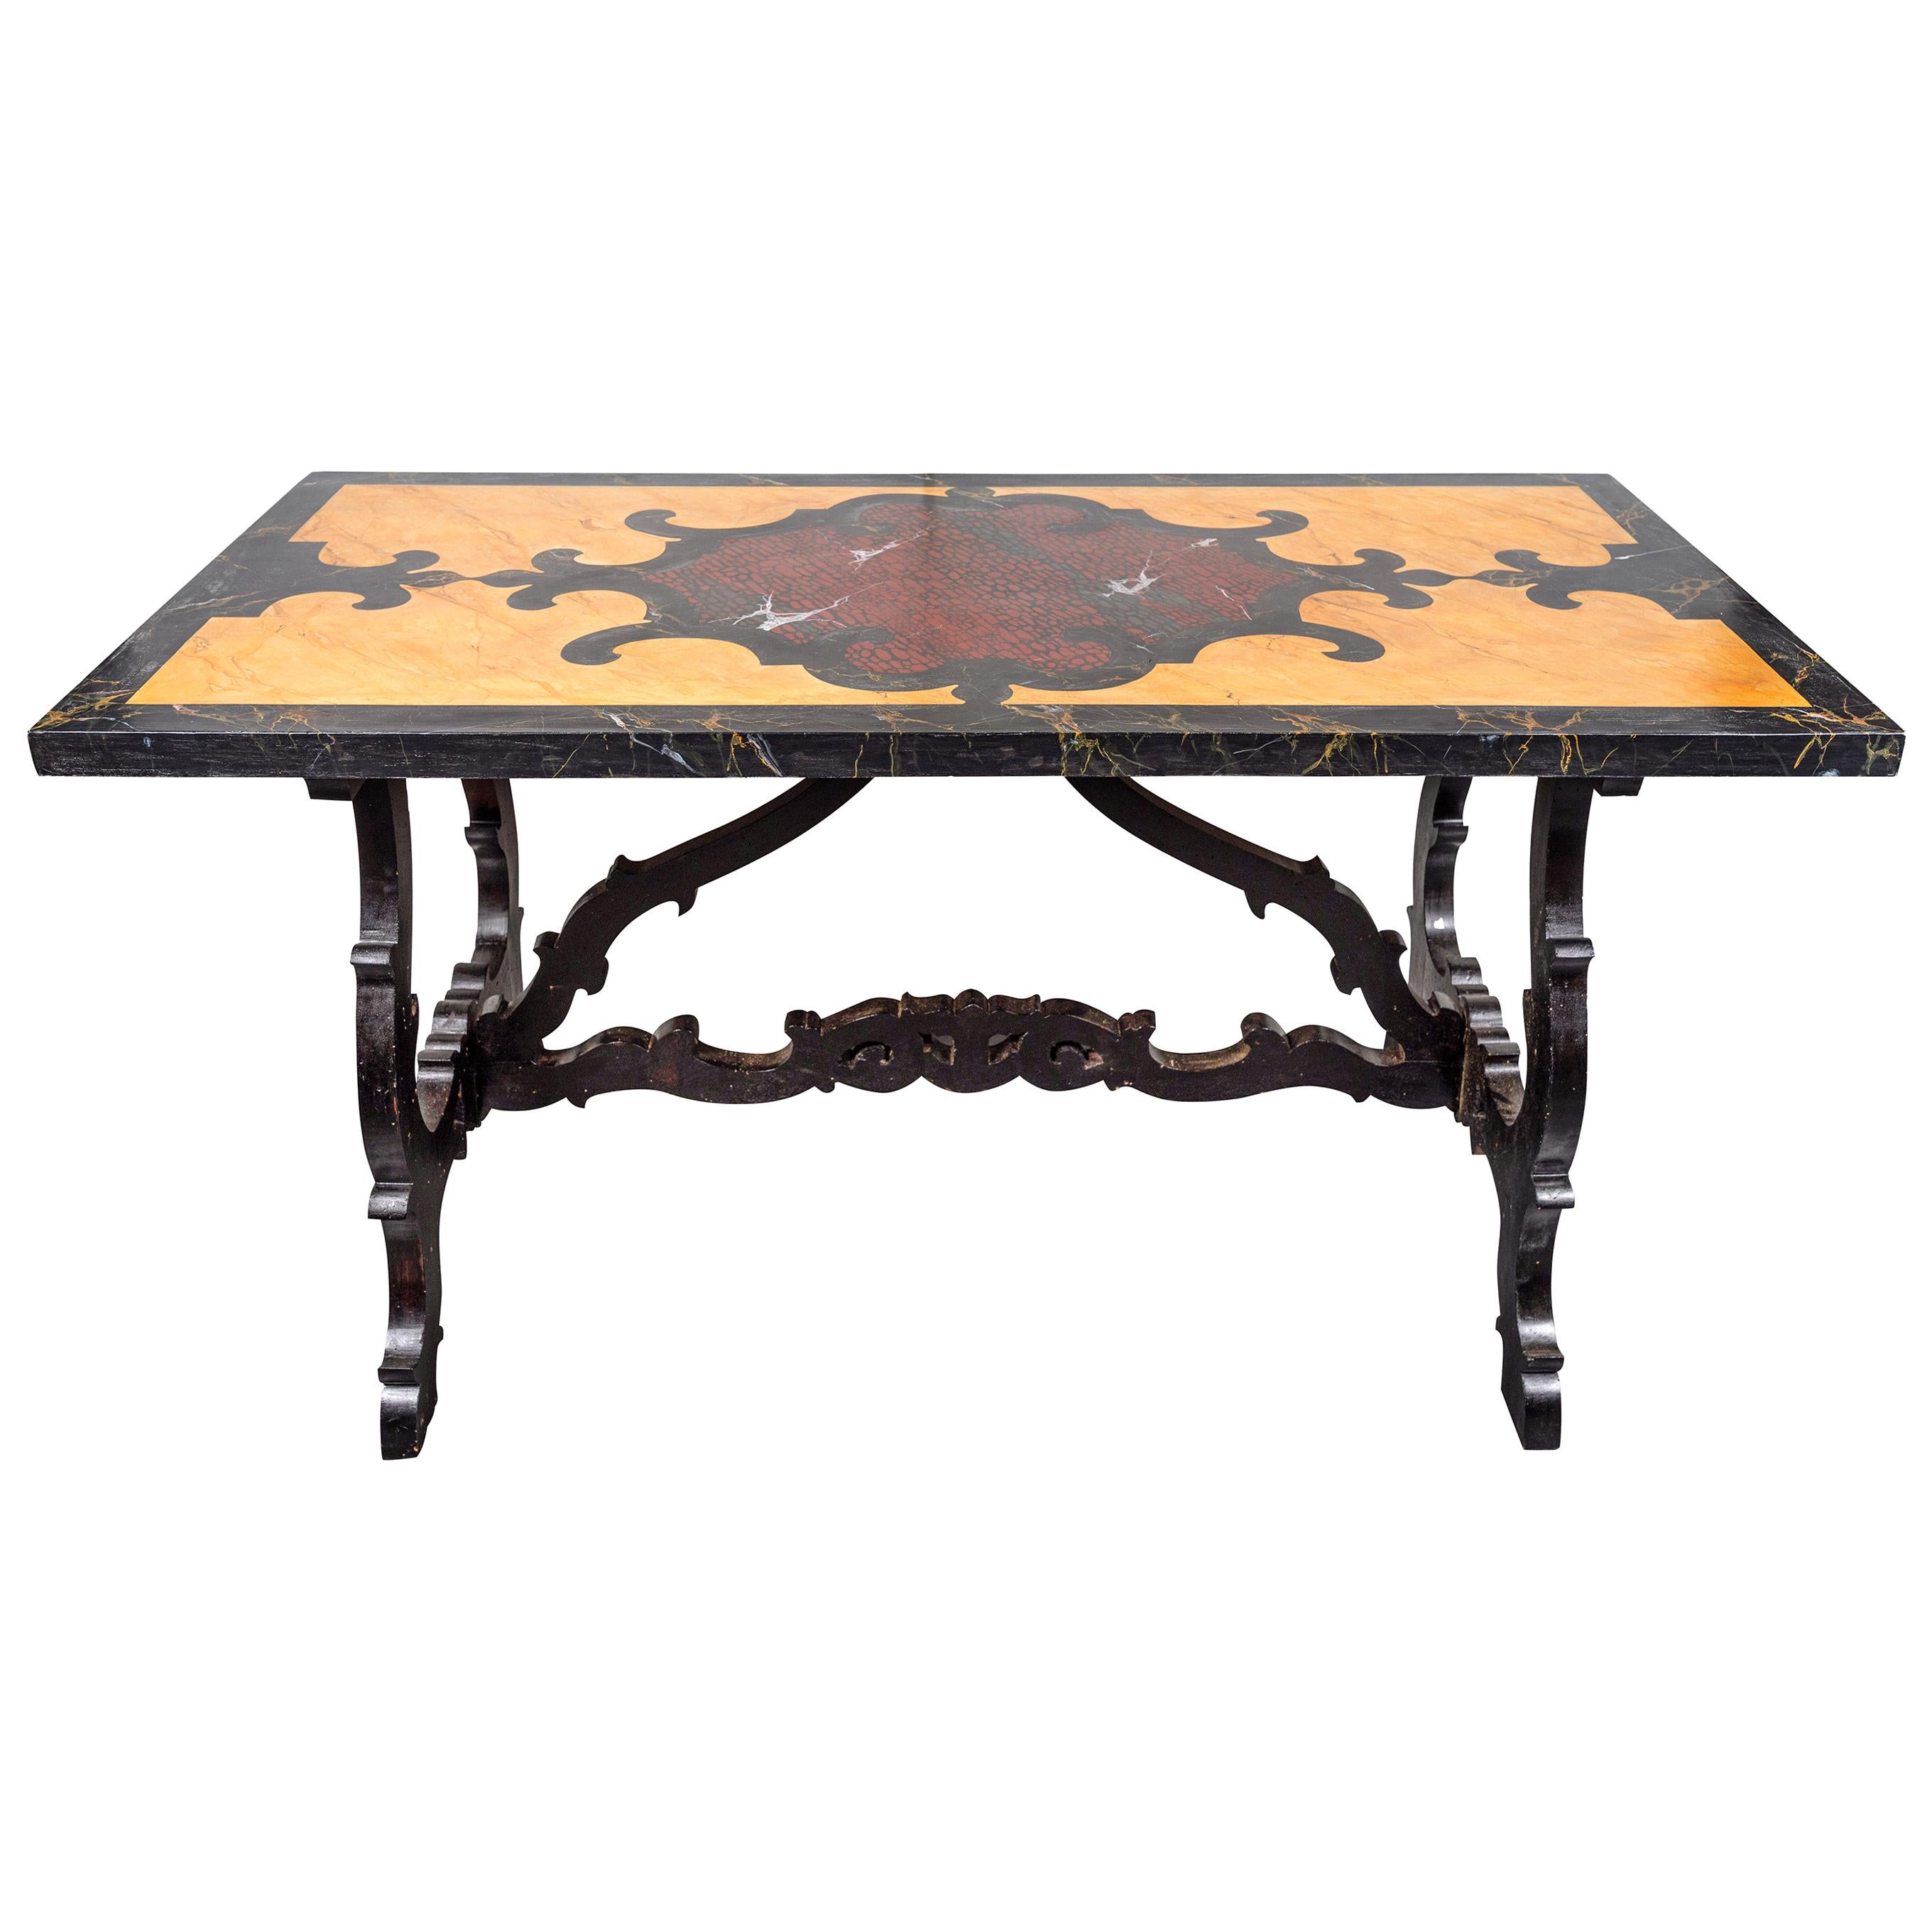 Antique, Faux Marble, Painted Table For Sale